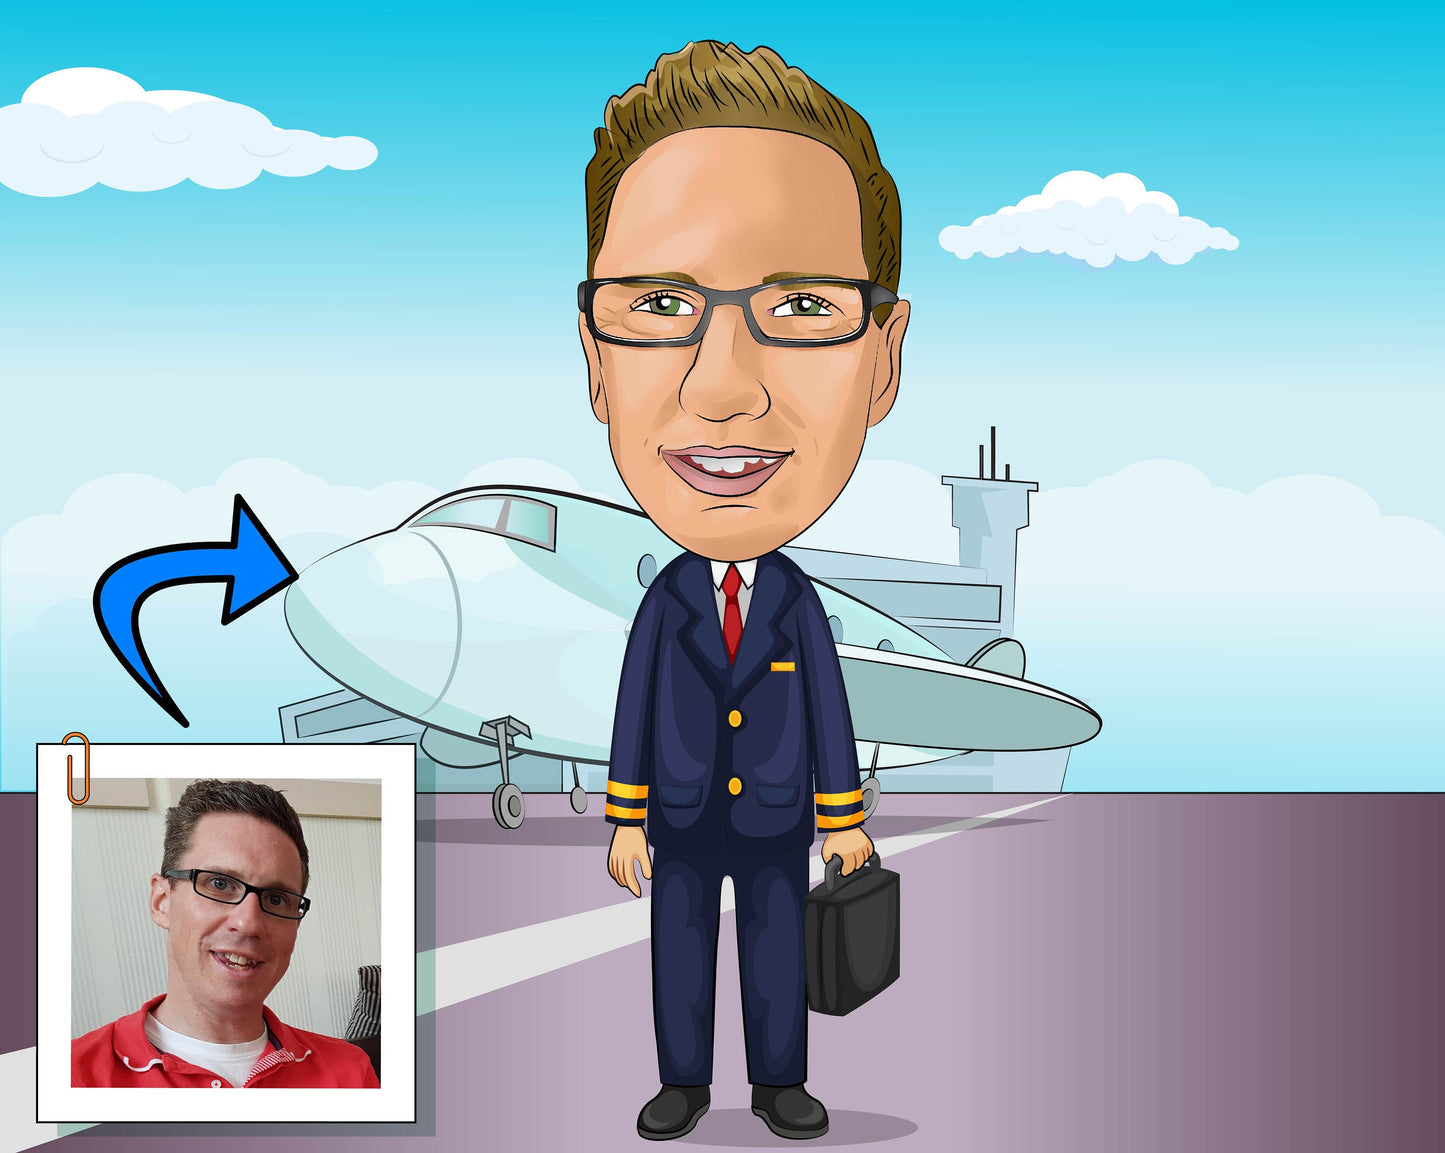 Helicopter Pilot Gift - Custom Caricature Portrait From Your Photo